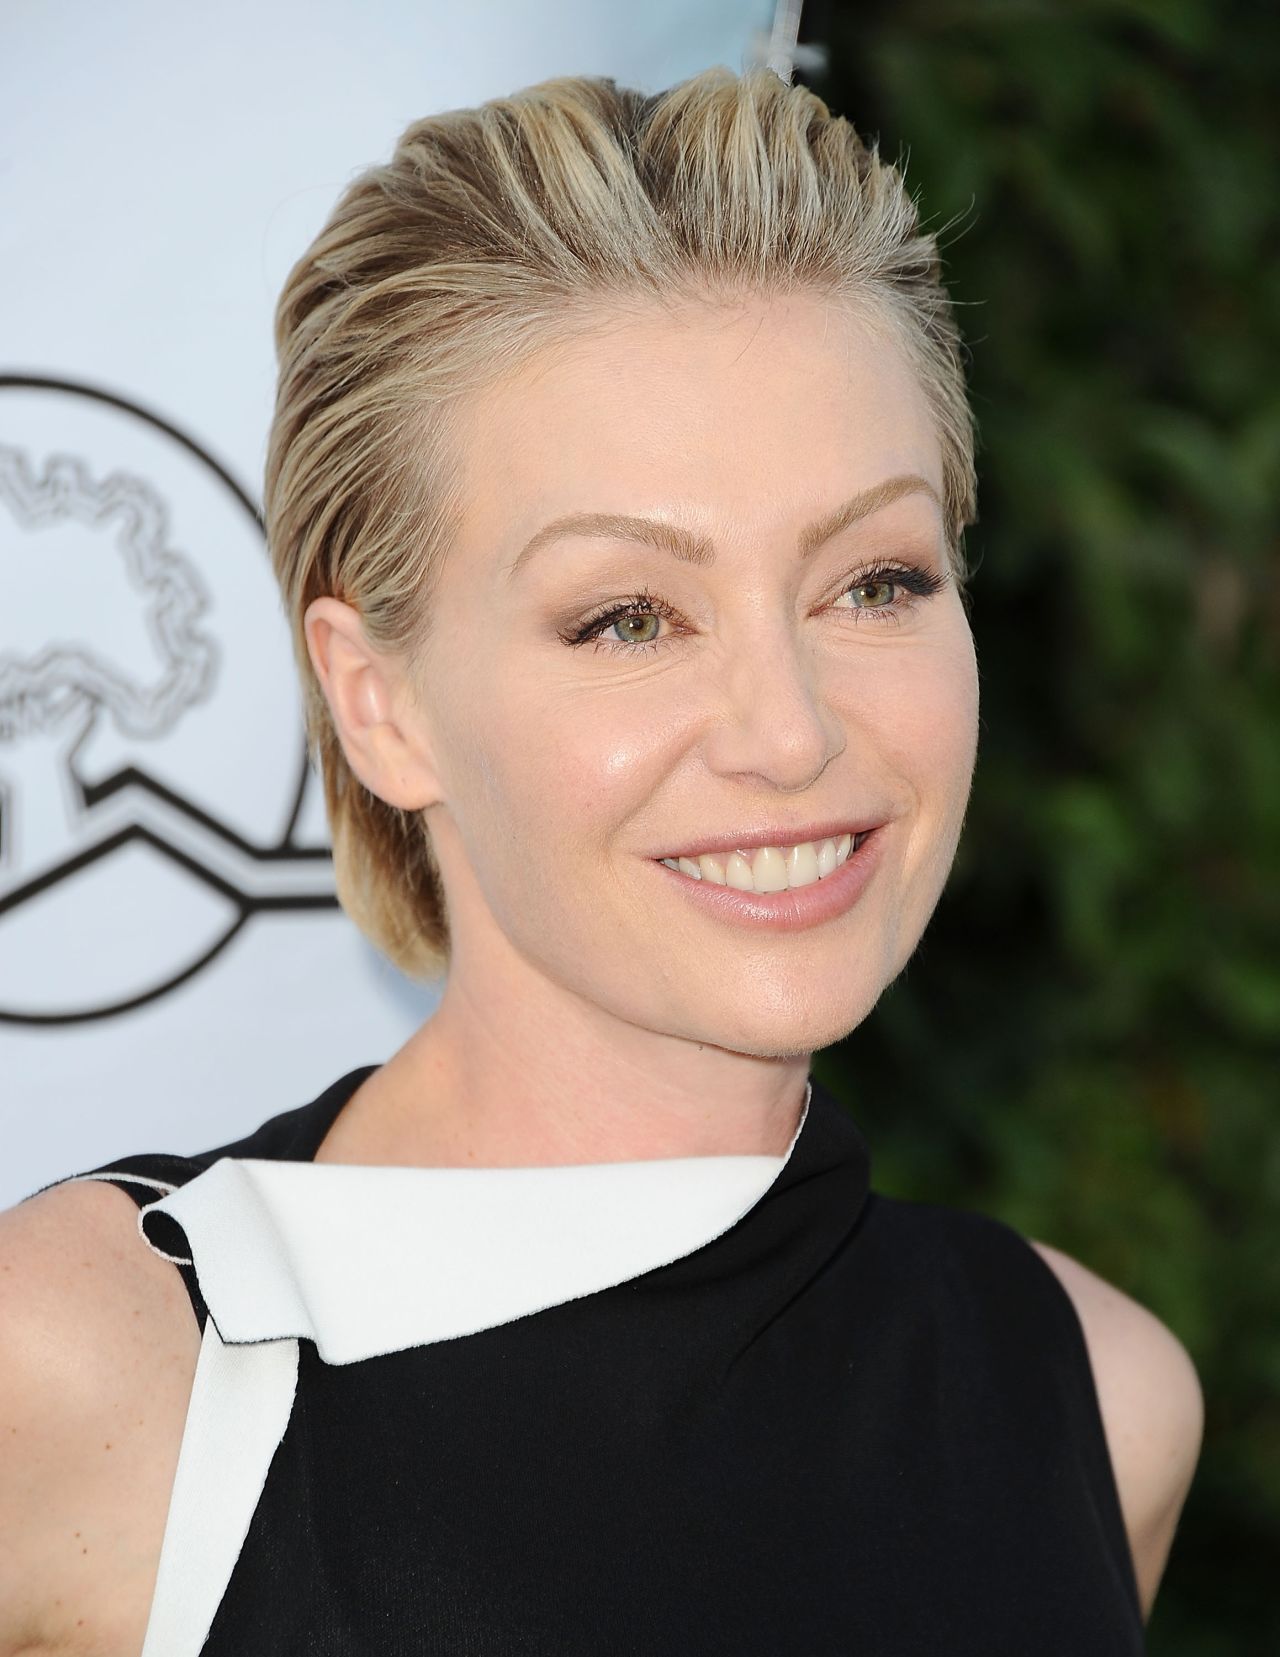 "Arrested Development" star Portia de Rossi and her wife, Ellen DeGeneres, have decided not to have children. "You have to really want to have kids, and neither of us did," de Rossi <a href="http://www.out.com/entertainment/television/2013/04/11/portia-de-rossi?page=0,2" target="_blank" target="_blank">told Out in 2013. </a>